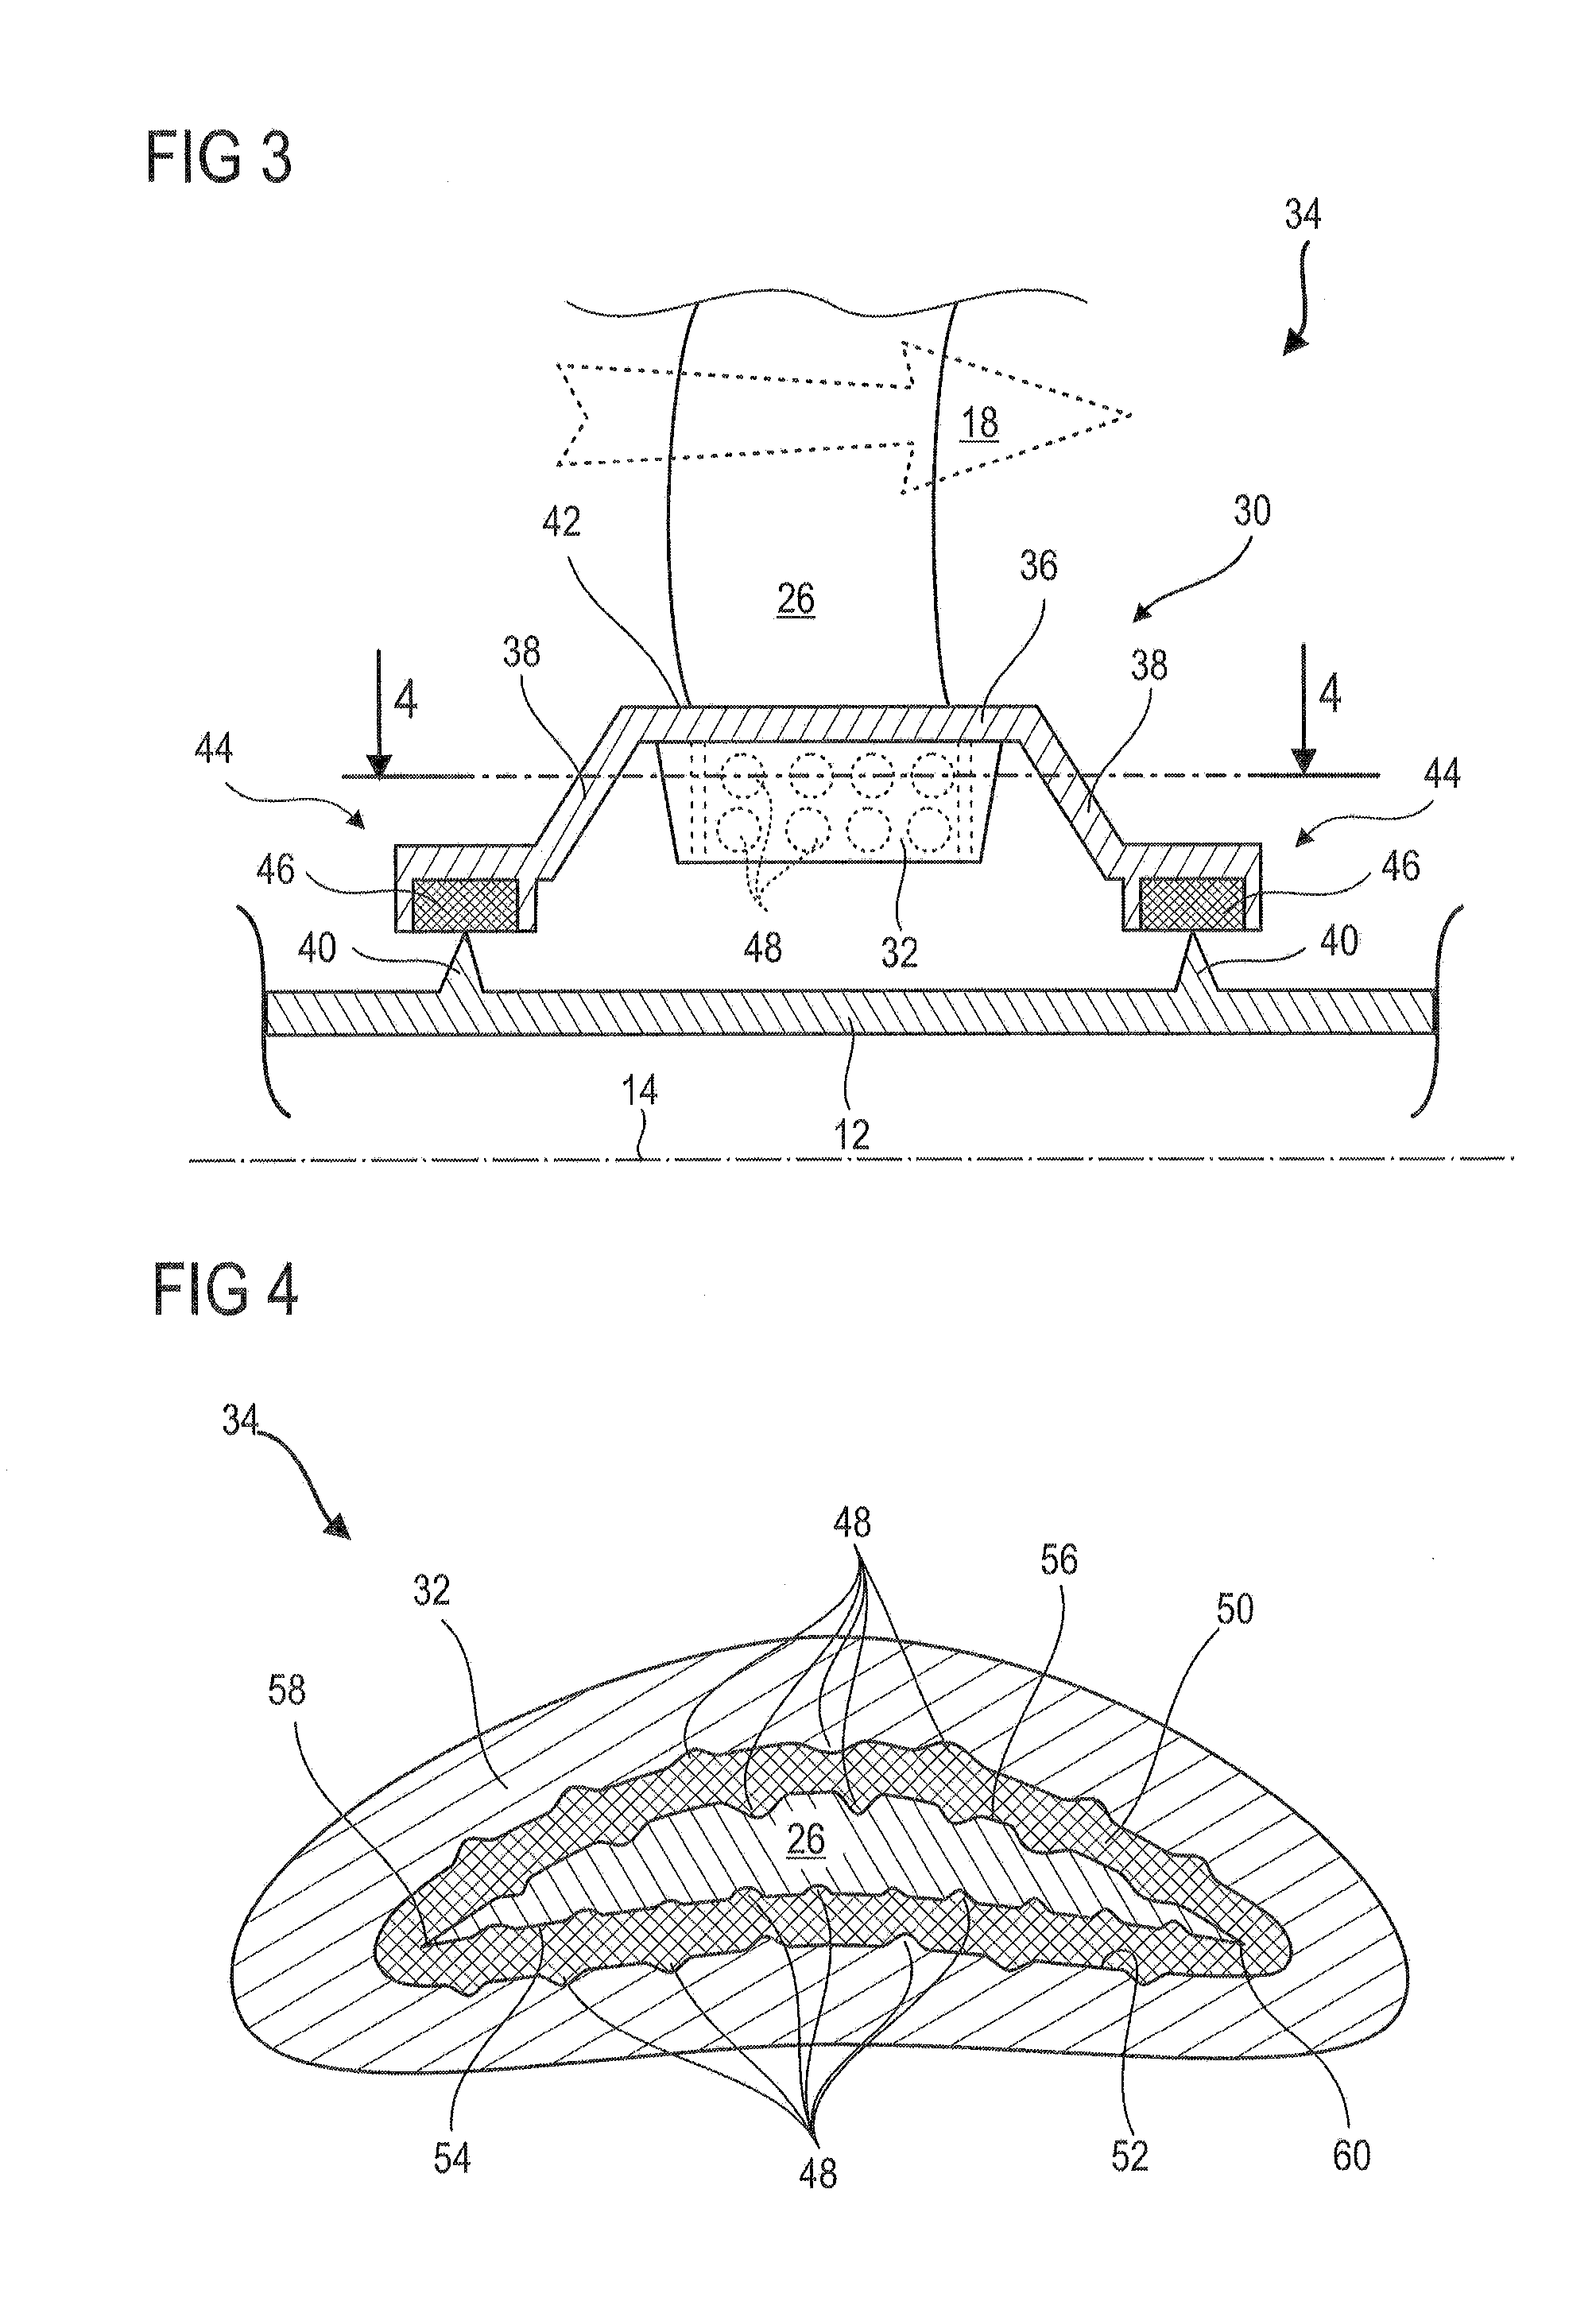 Blade and Shroud with Socket for a Compressor of an Axial Turbomachine